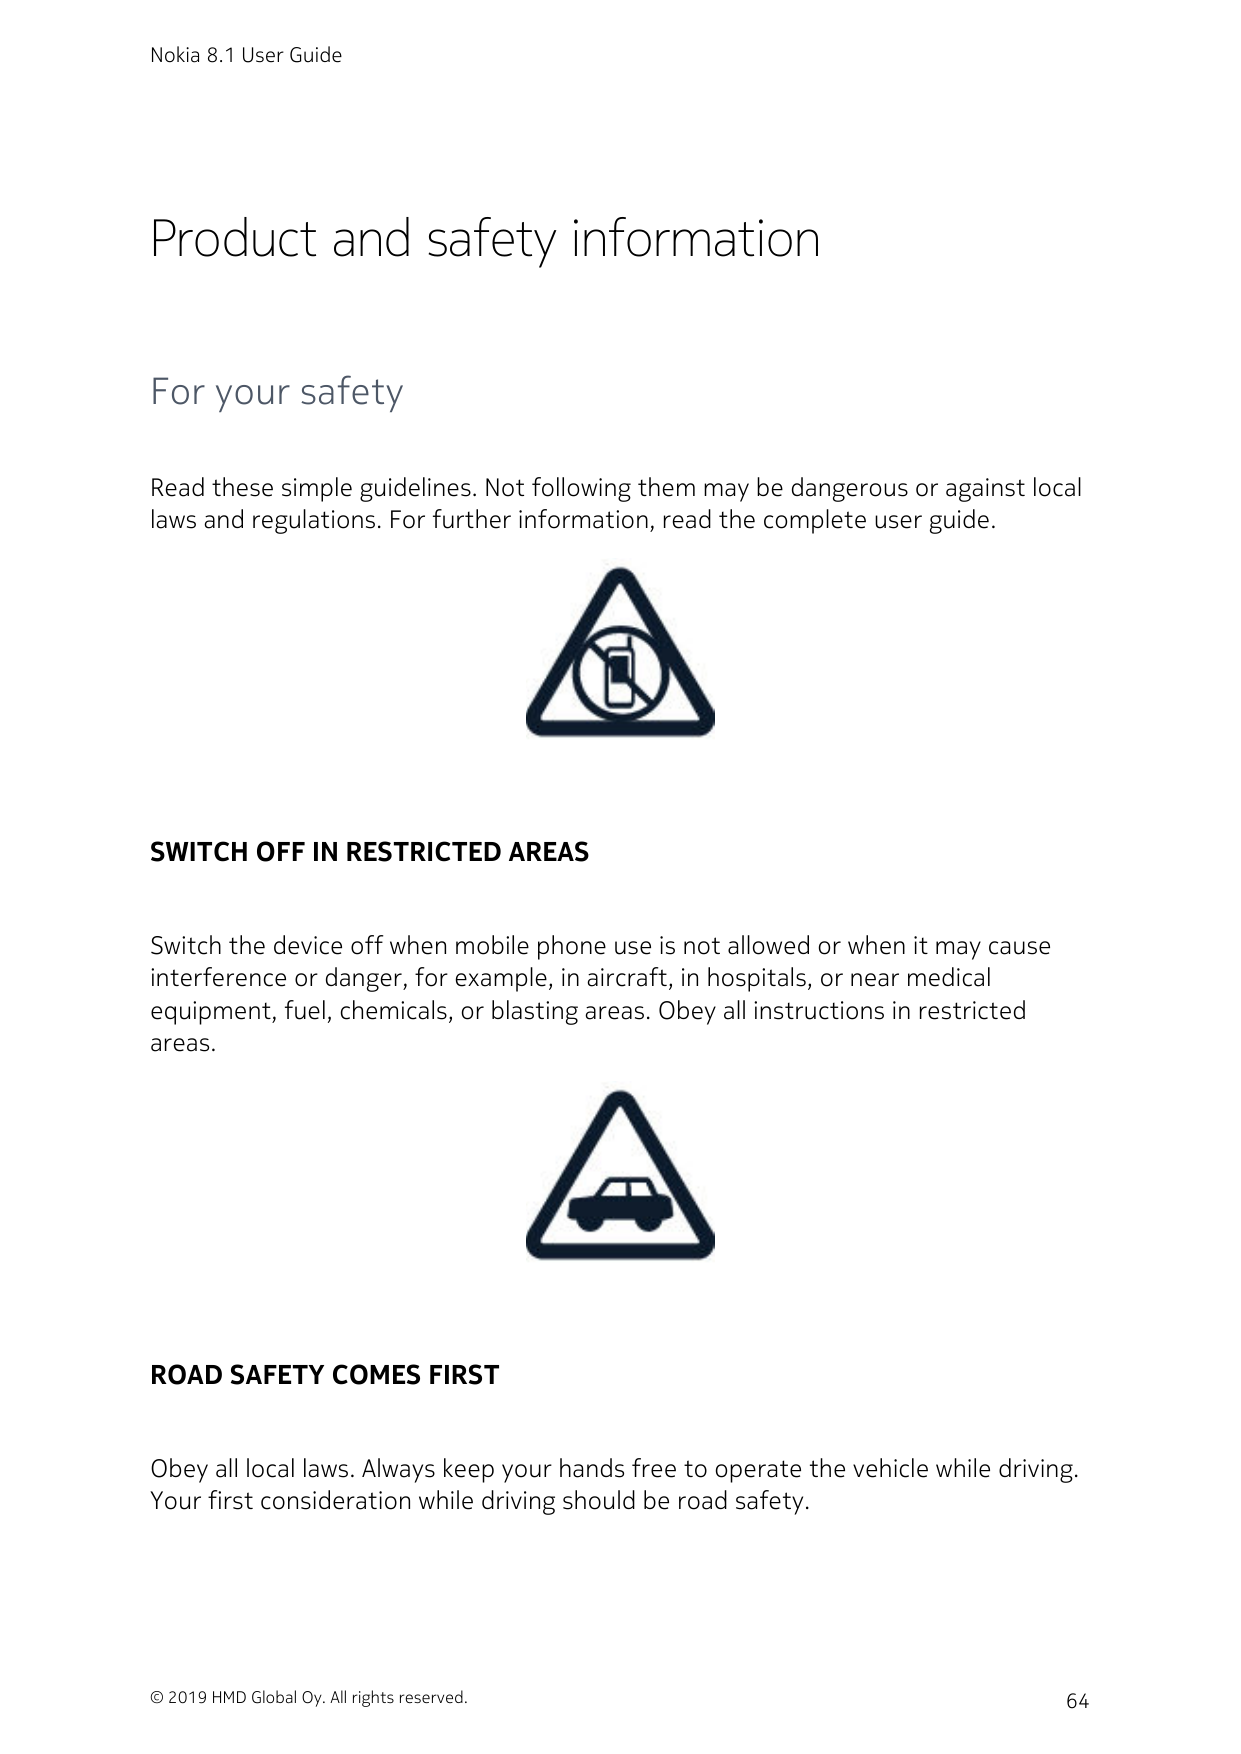 Nokia 8.1 User GuideProduct and safety informationFor your safetyRead these simple guidelines. Not following them may be dangero